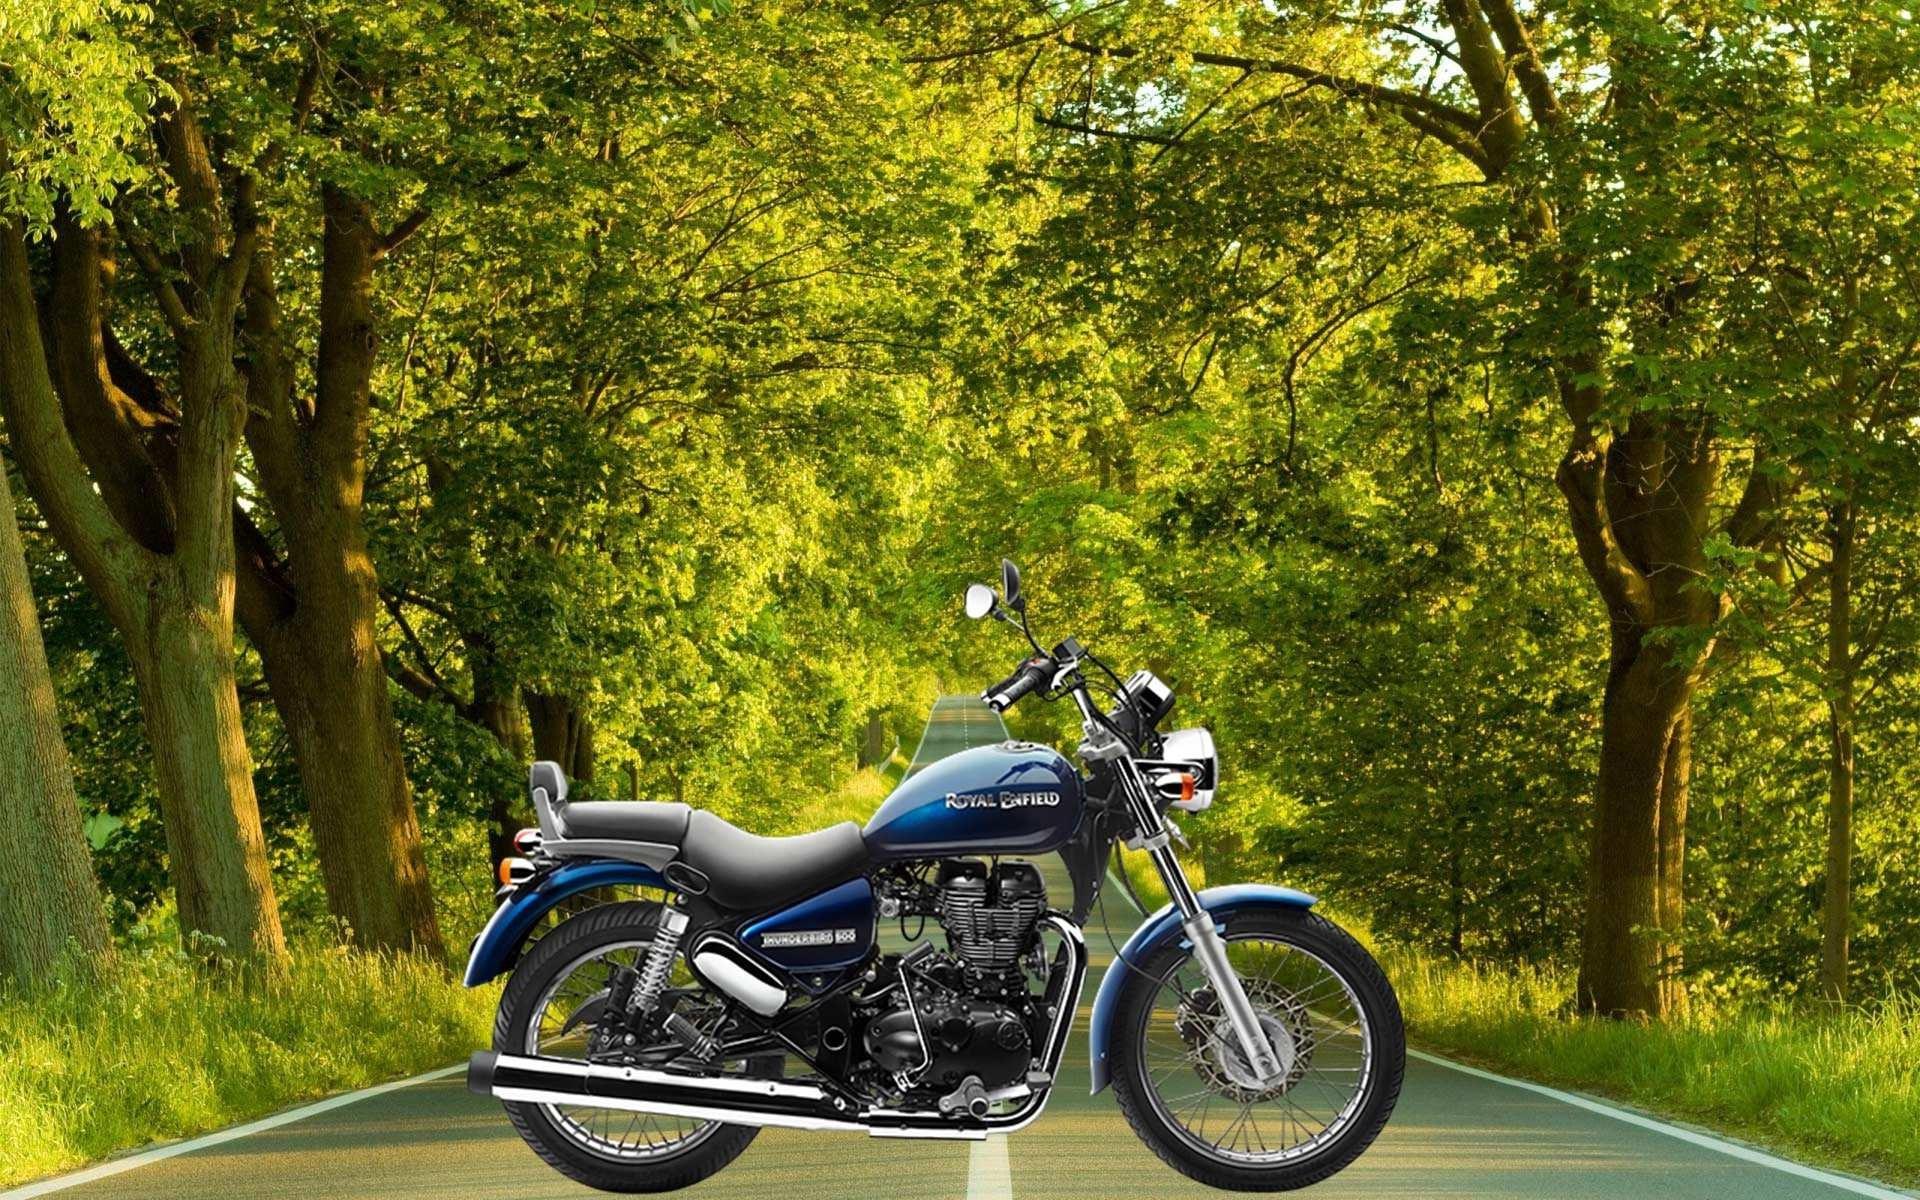 Royal Enfield Wallpaper For Laptop - Rev Up Your Screens with Stunning